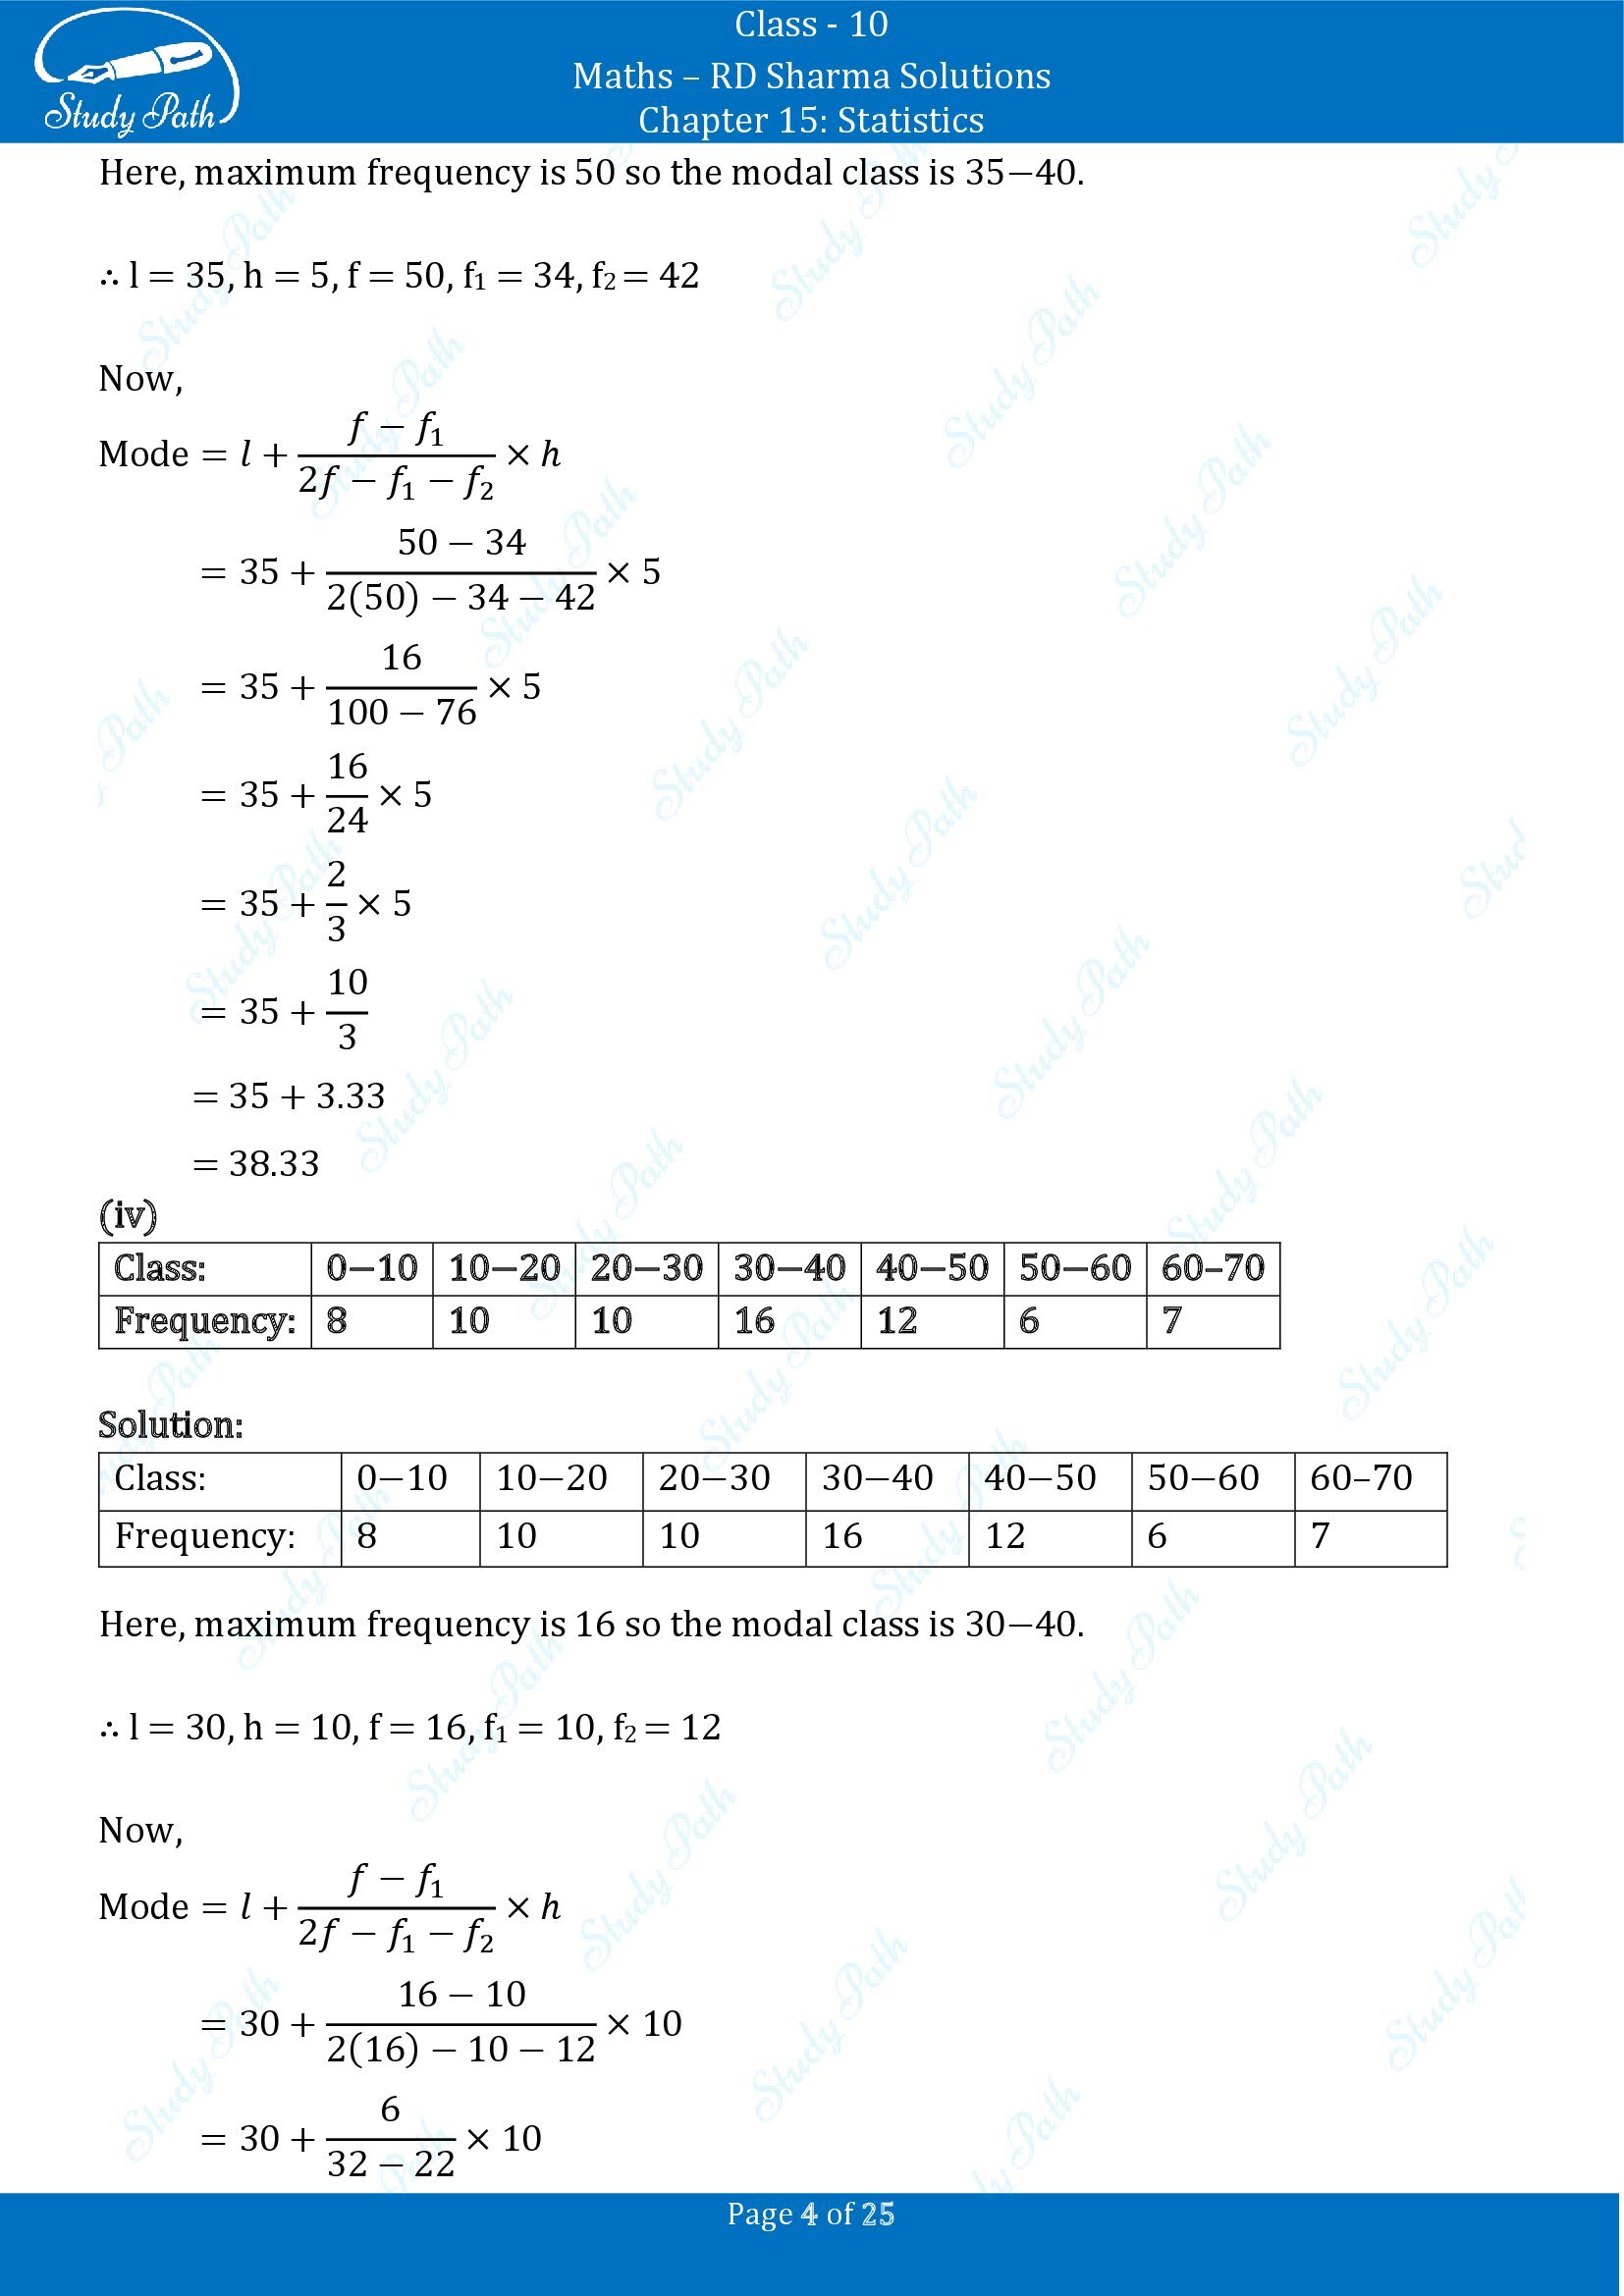 RD Sharma Solutions Class 10 Chapter 15 Statistics Exercise 15.5 00004